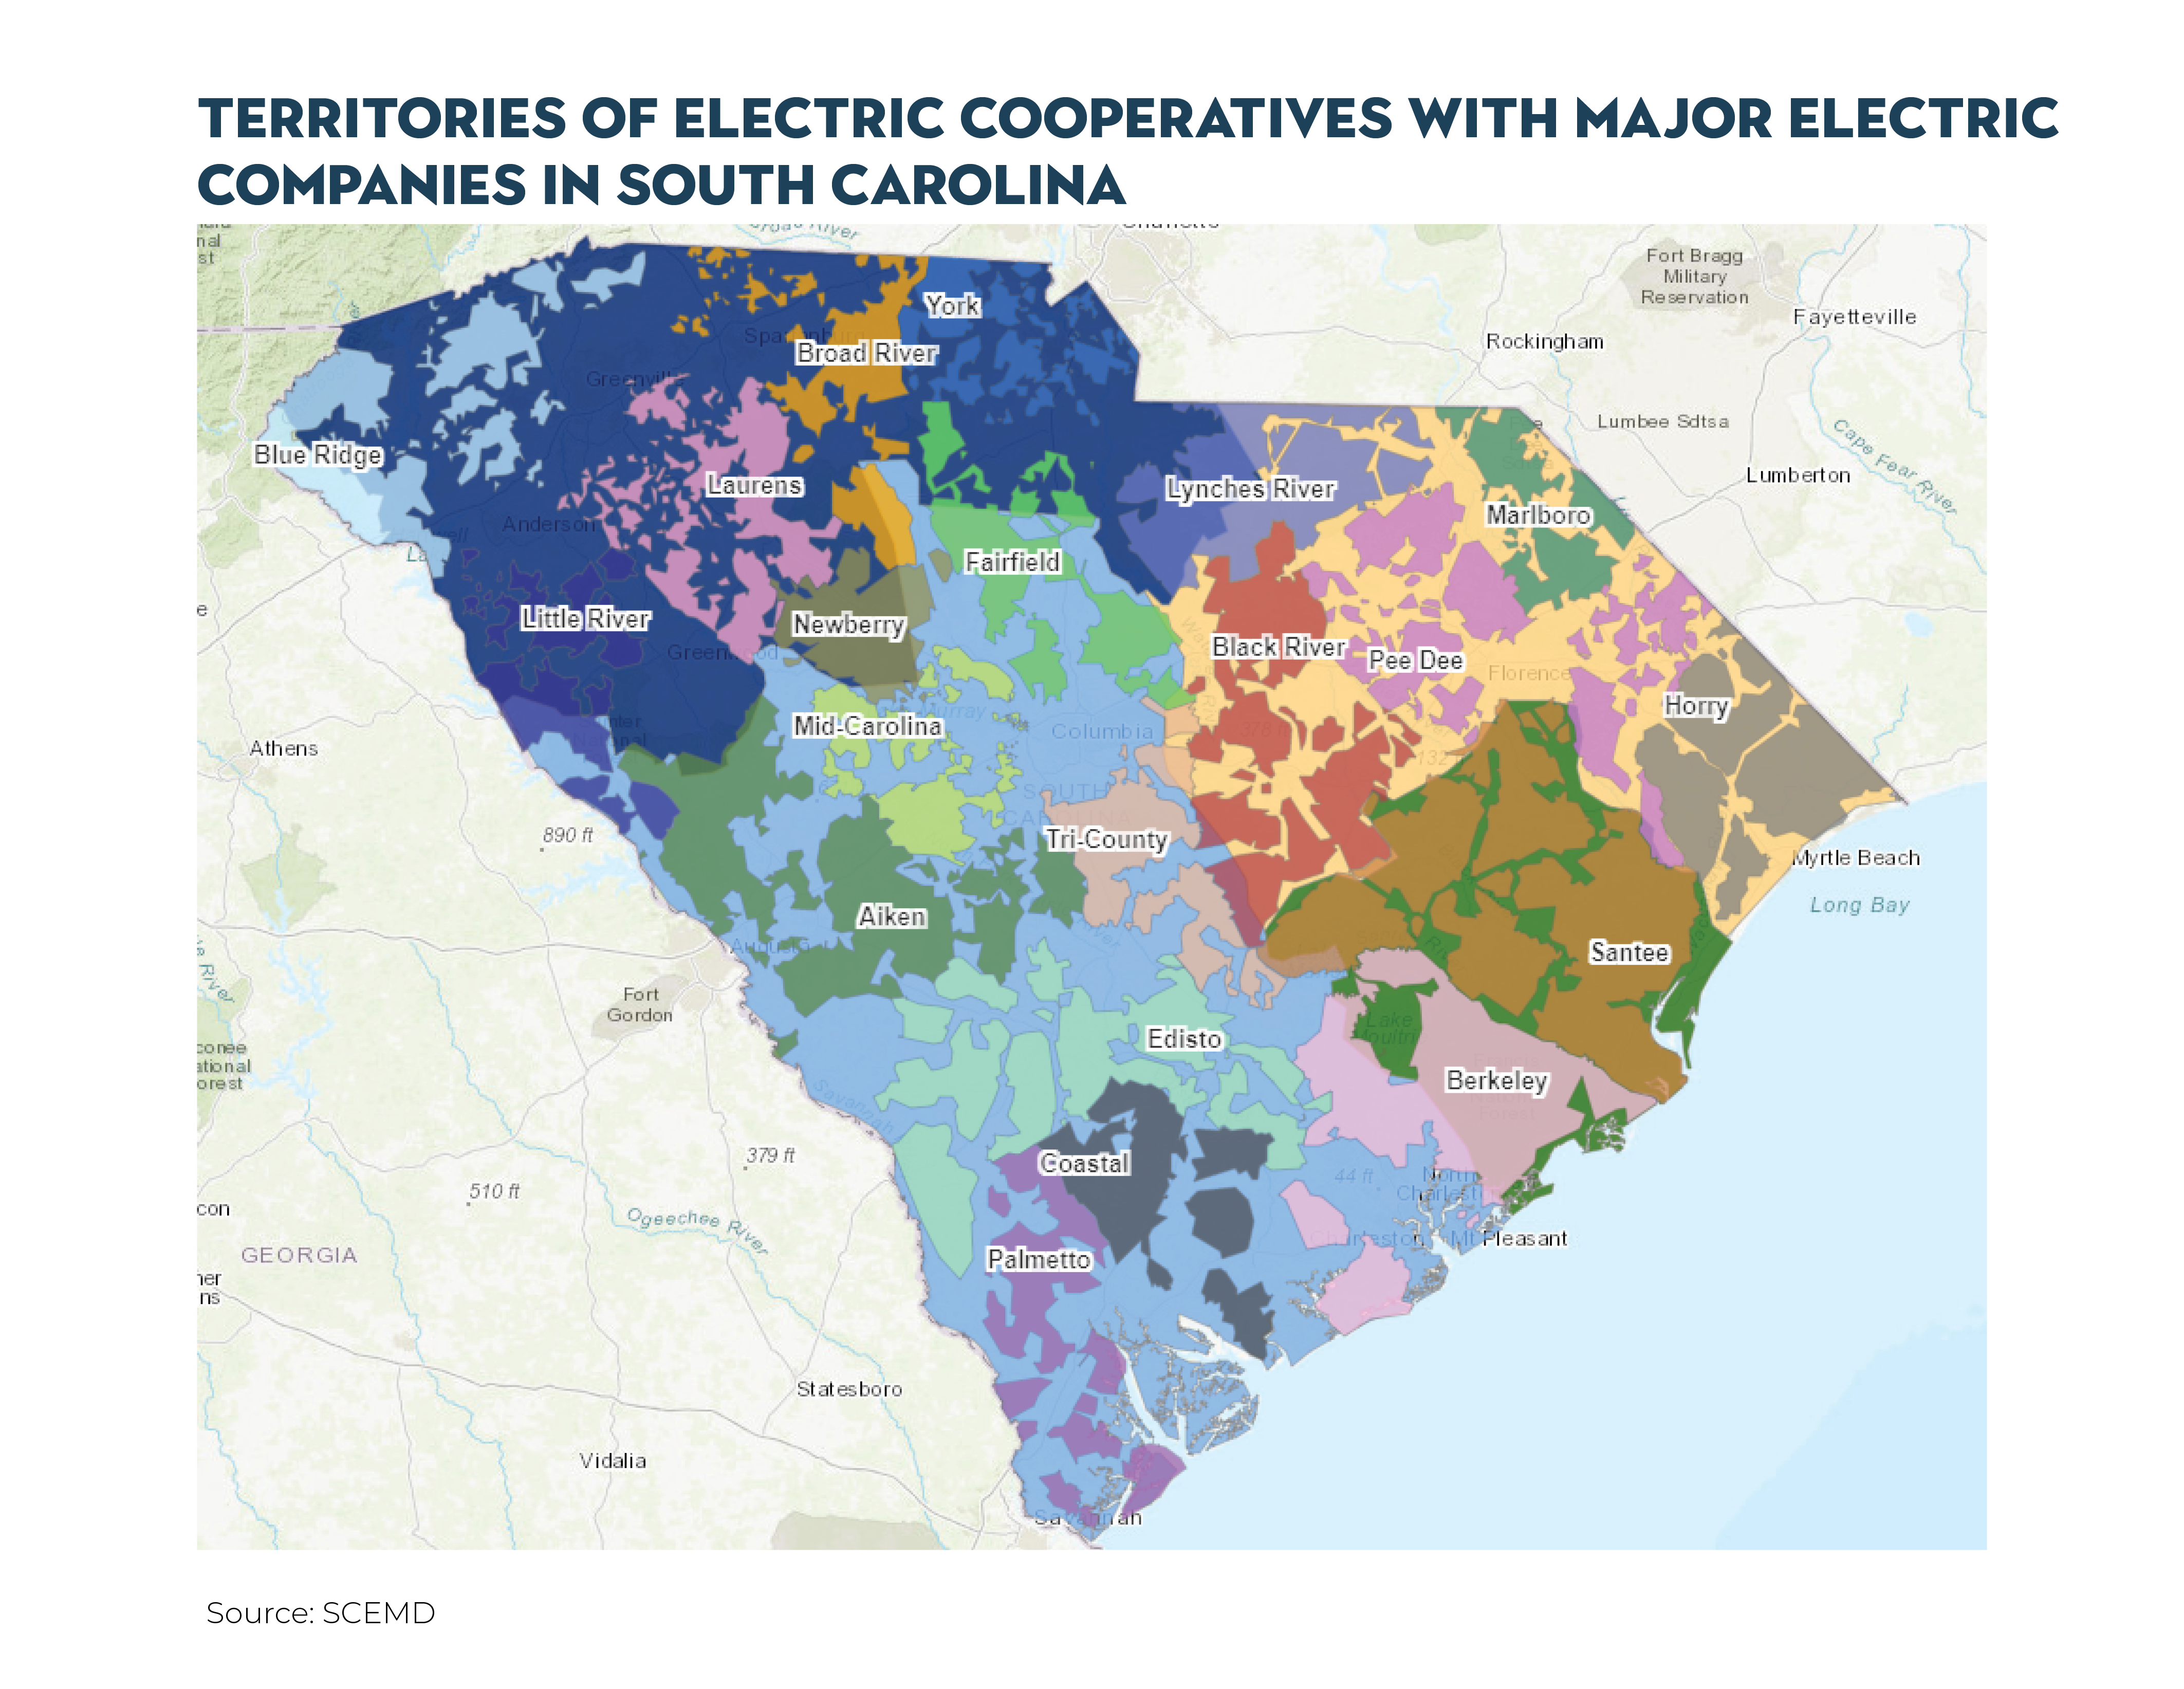 Cooperatives with major electric companies in SC